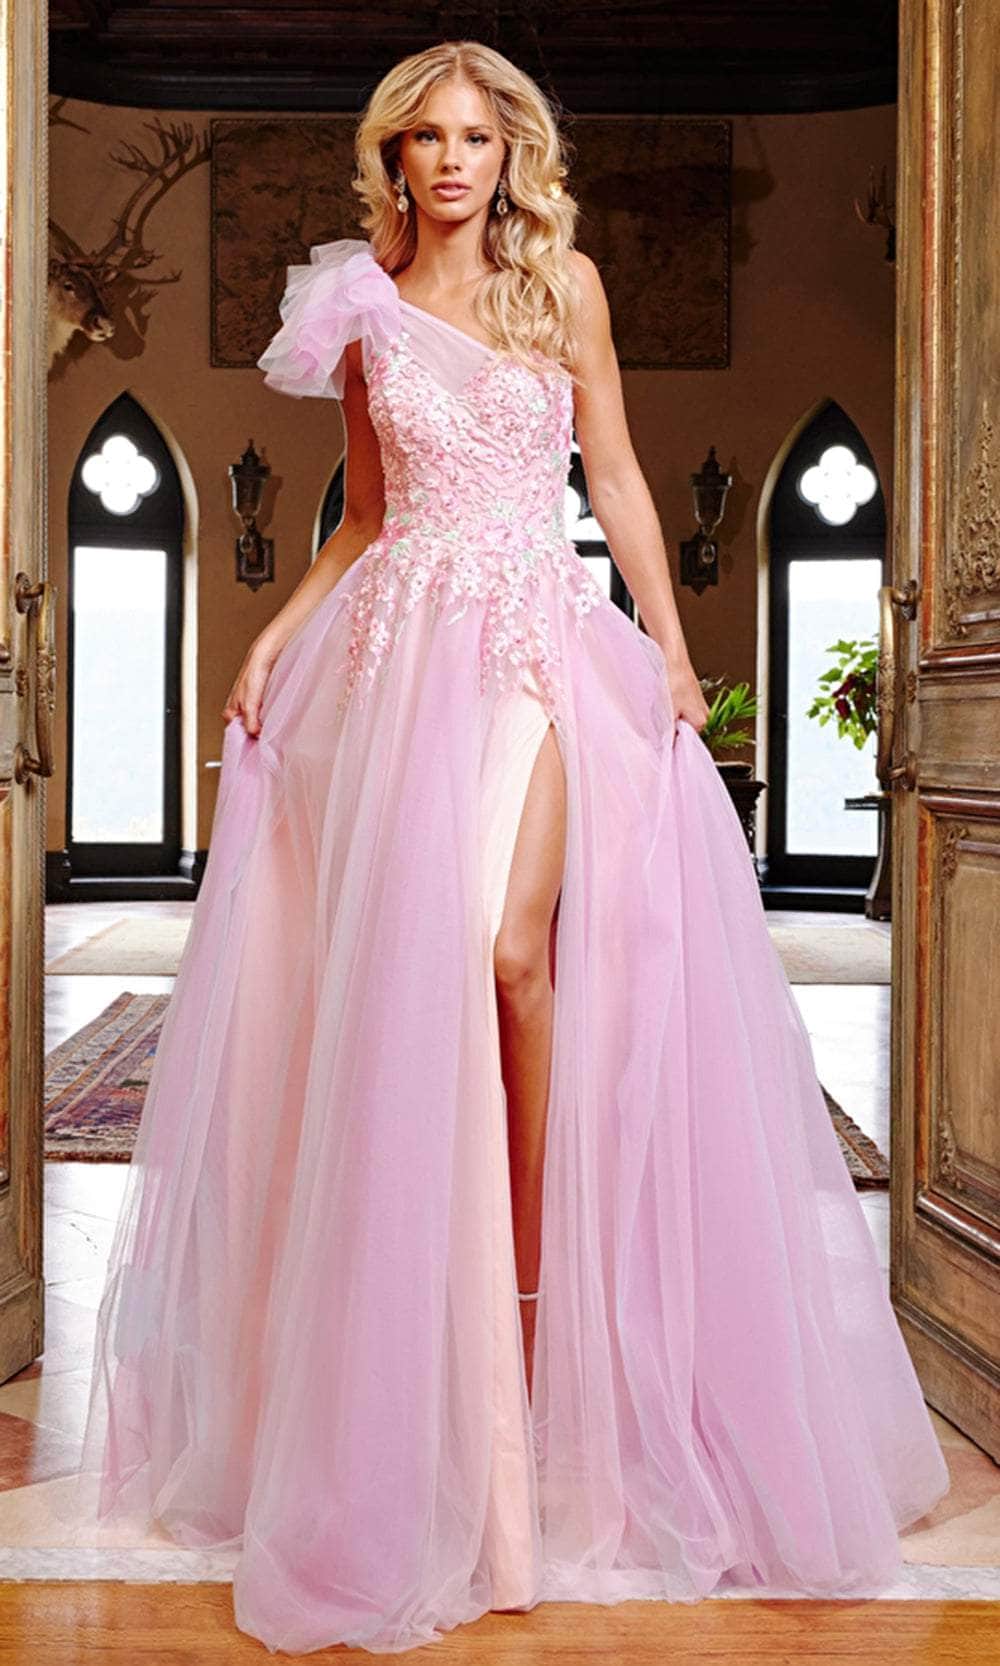 Image of Jovani 23951 - Floral Embroidered Tulle Asymmetric Dress